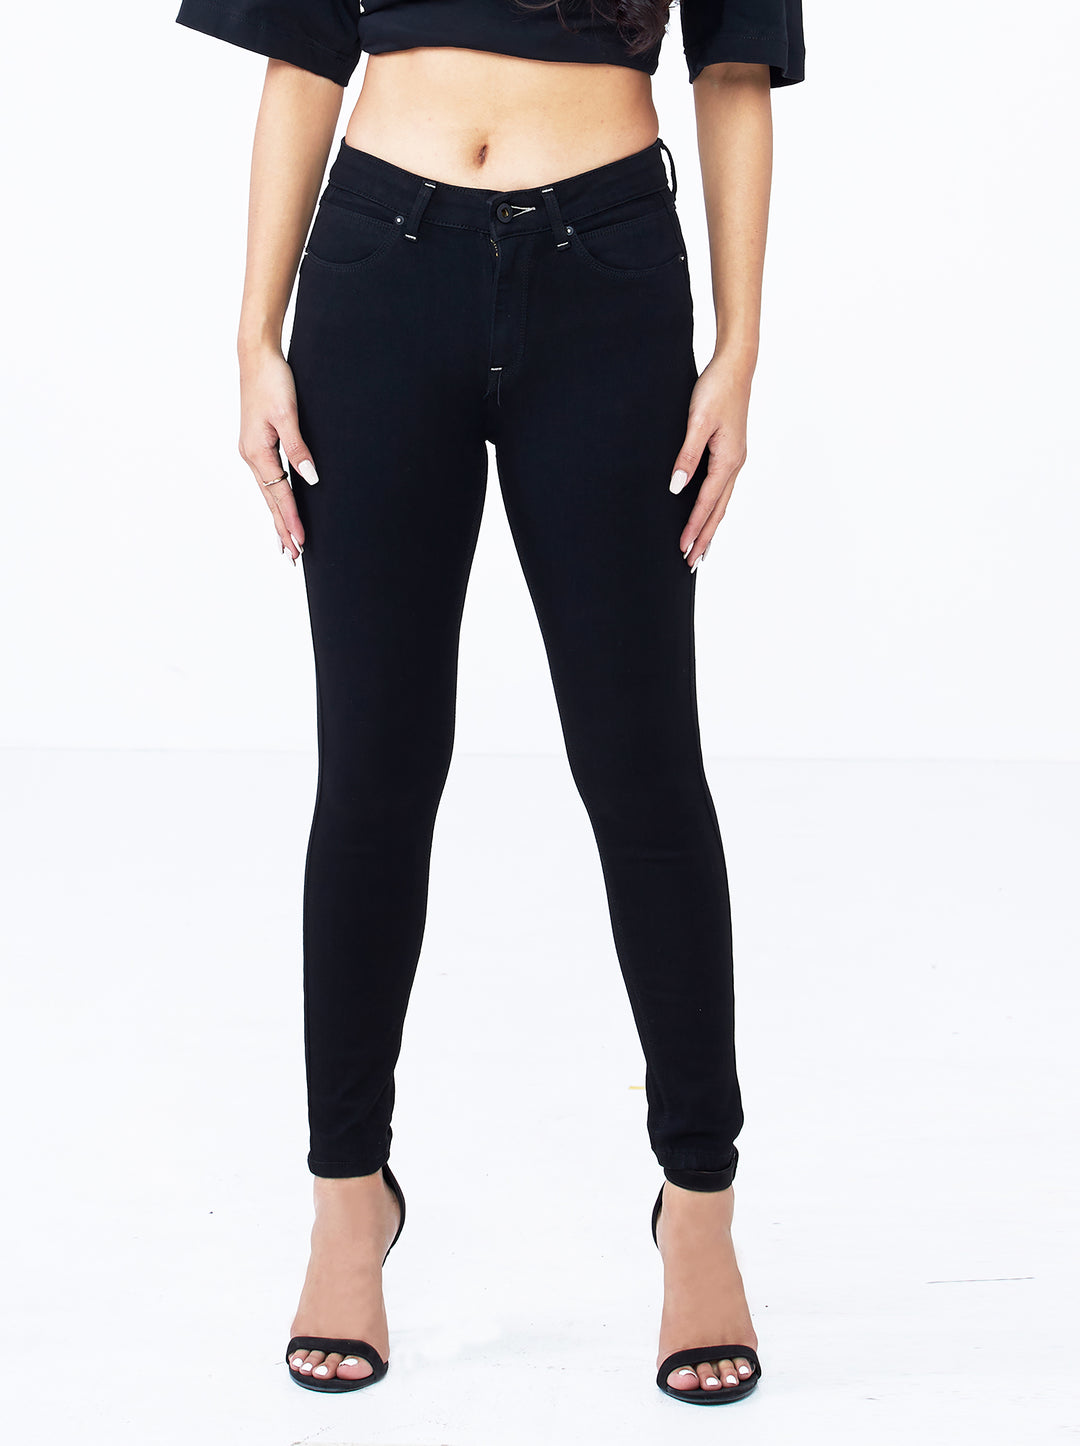 Jag Ivana Jeans in One Wash 25"